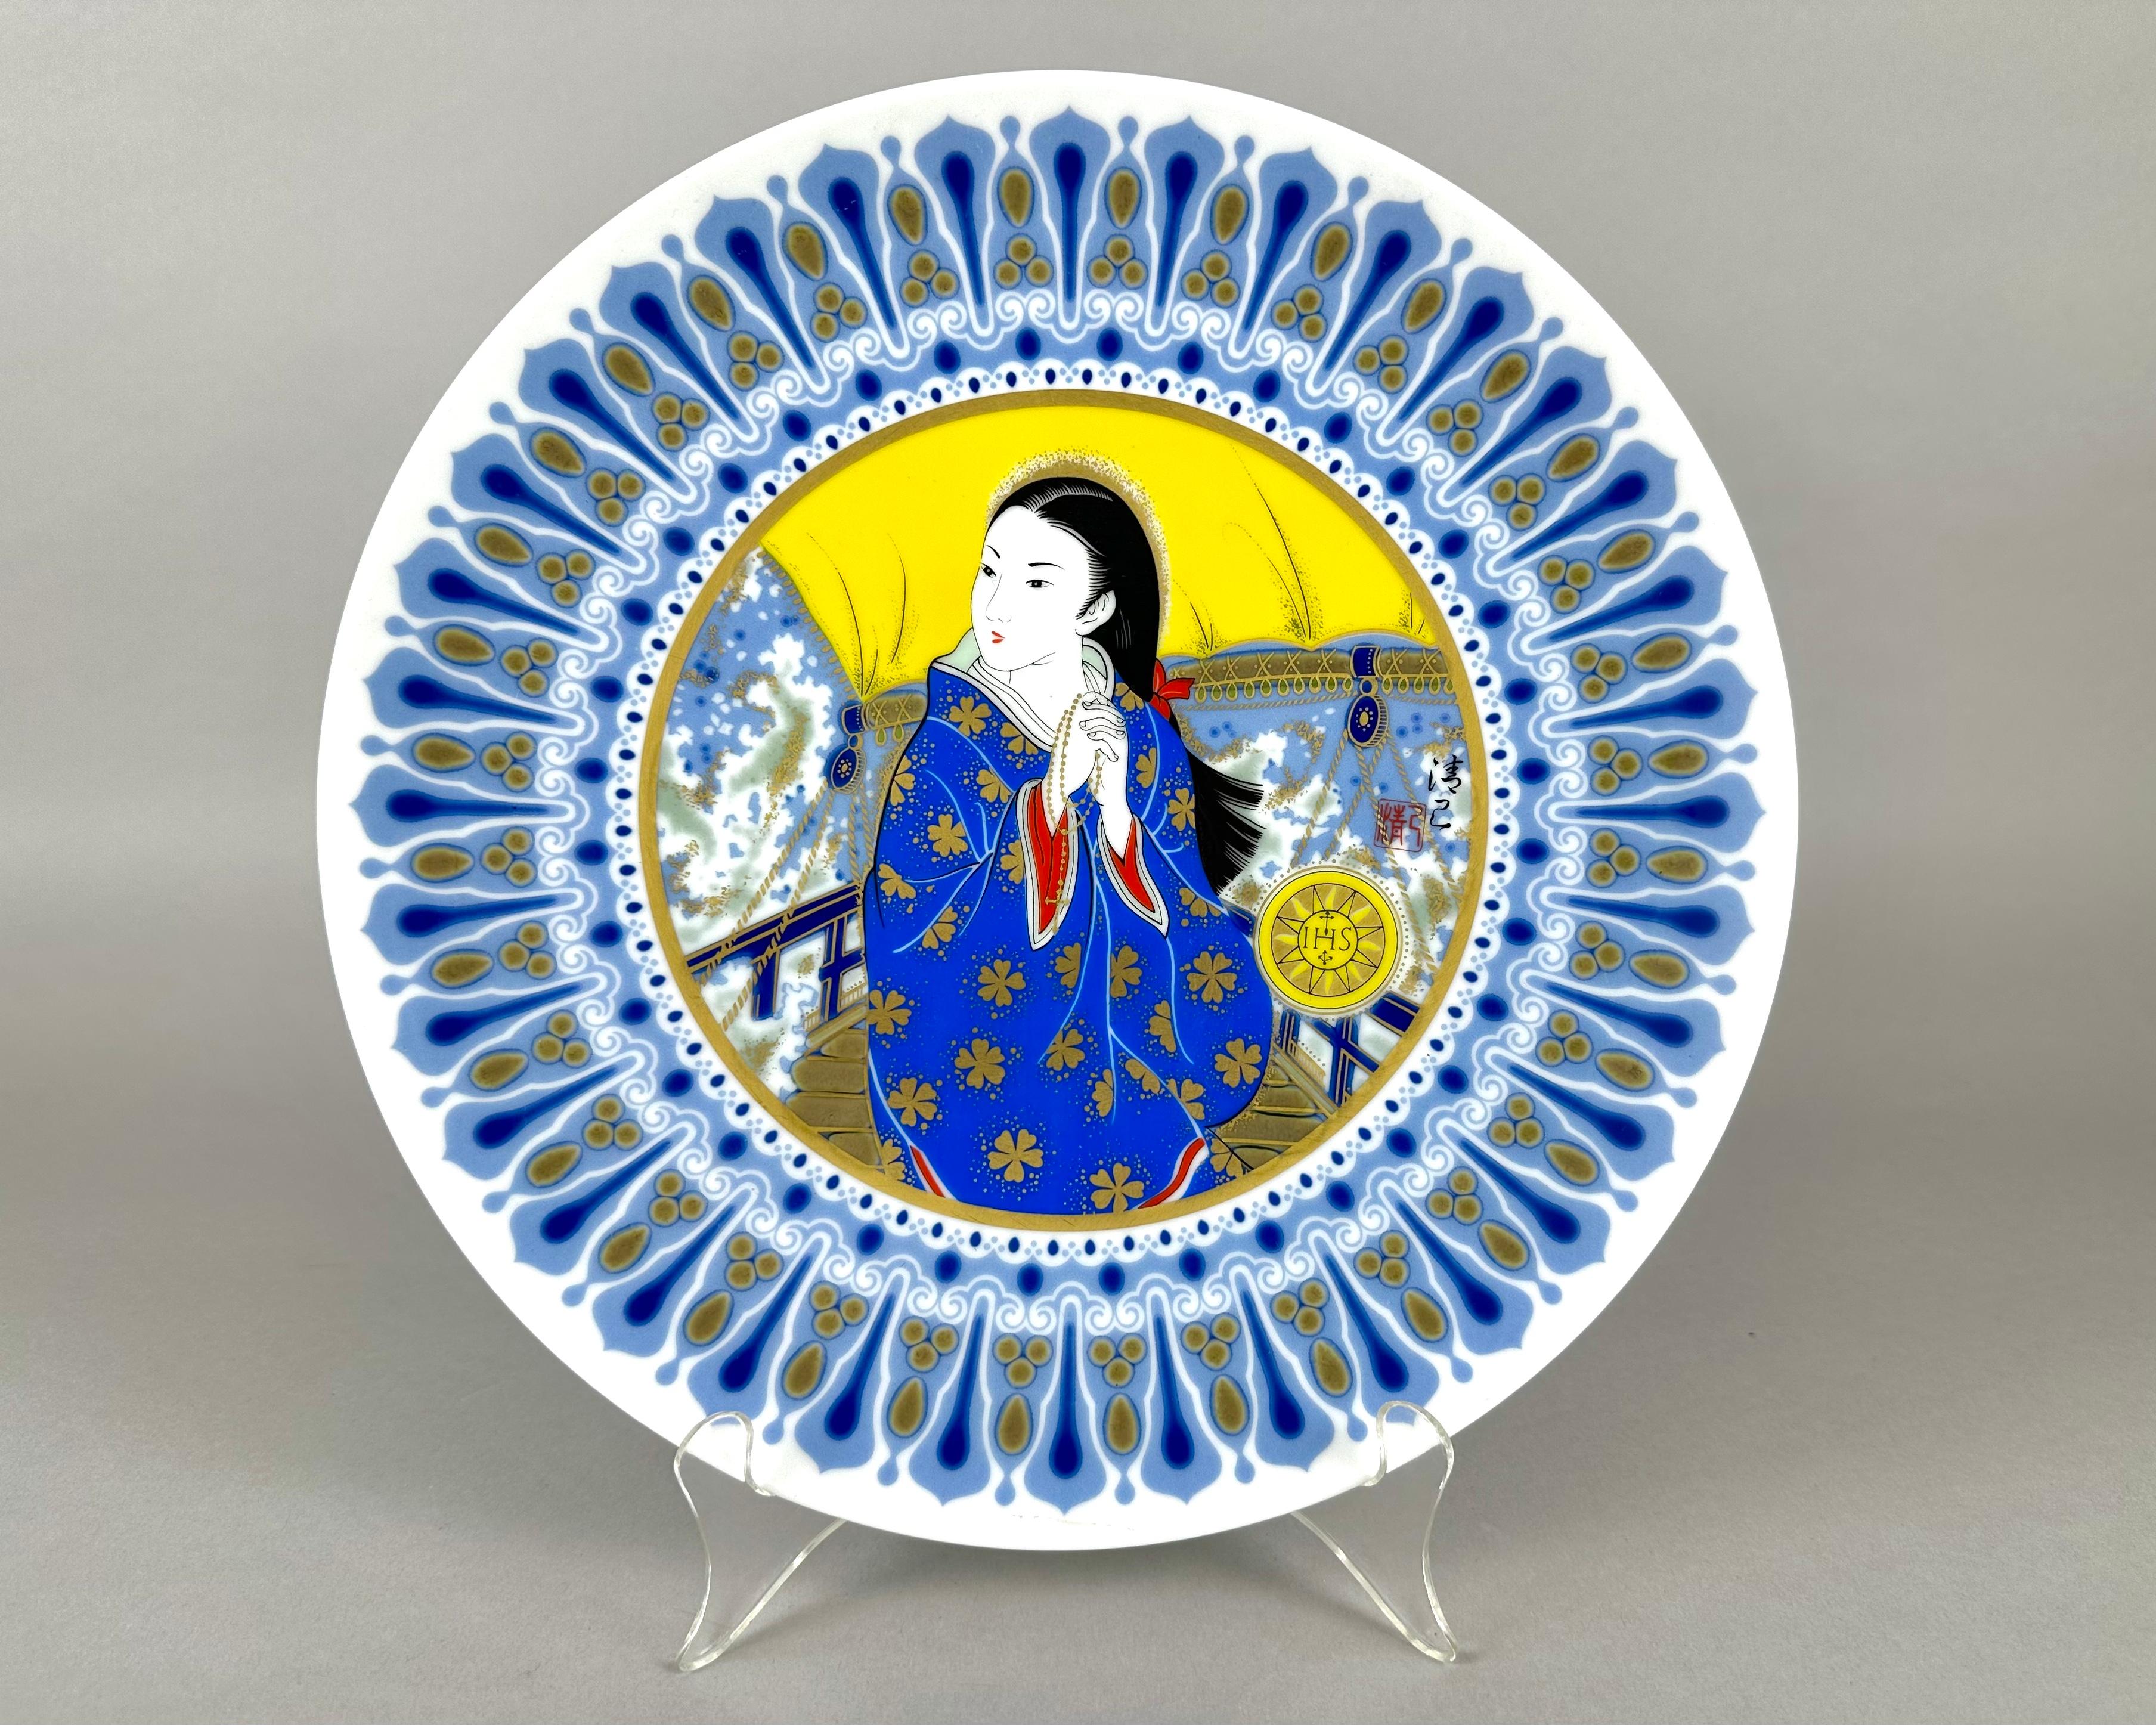 Discontinued Noritake plates have multicolor image with Asian woman and man in center, with gold tone band and highlights.

Designed by: Kiyomi Akagi.

The Japanese porcelain manufacturing company Noritake is considered one of the best in the